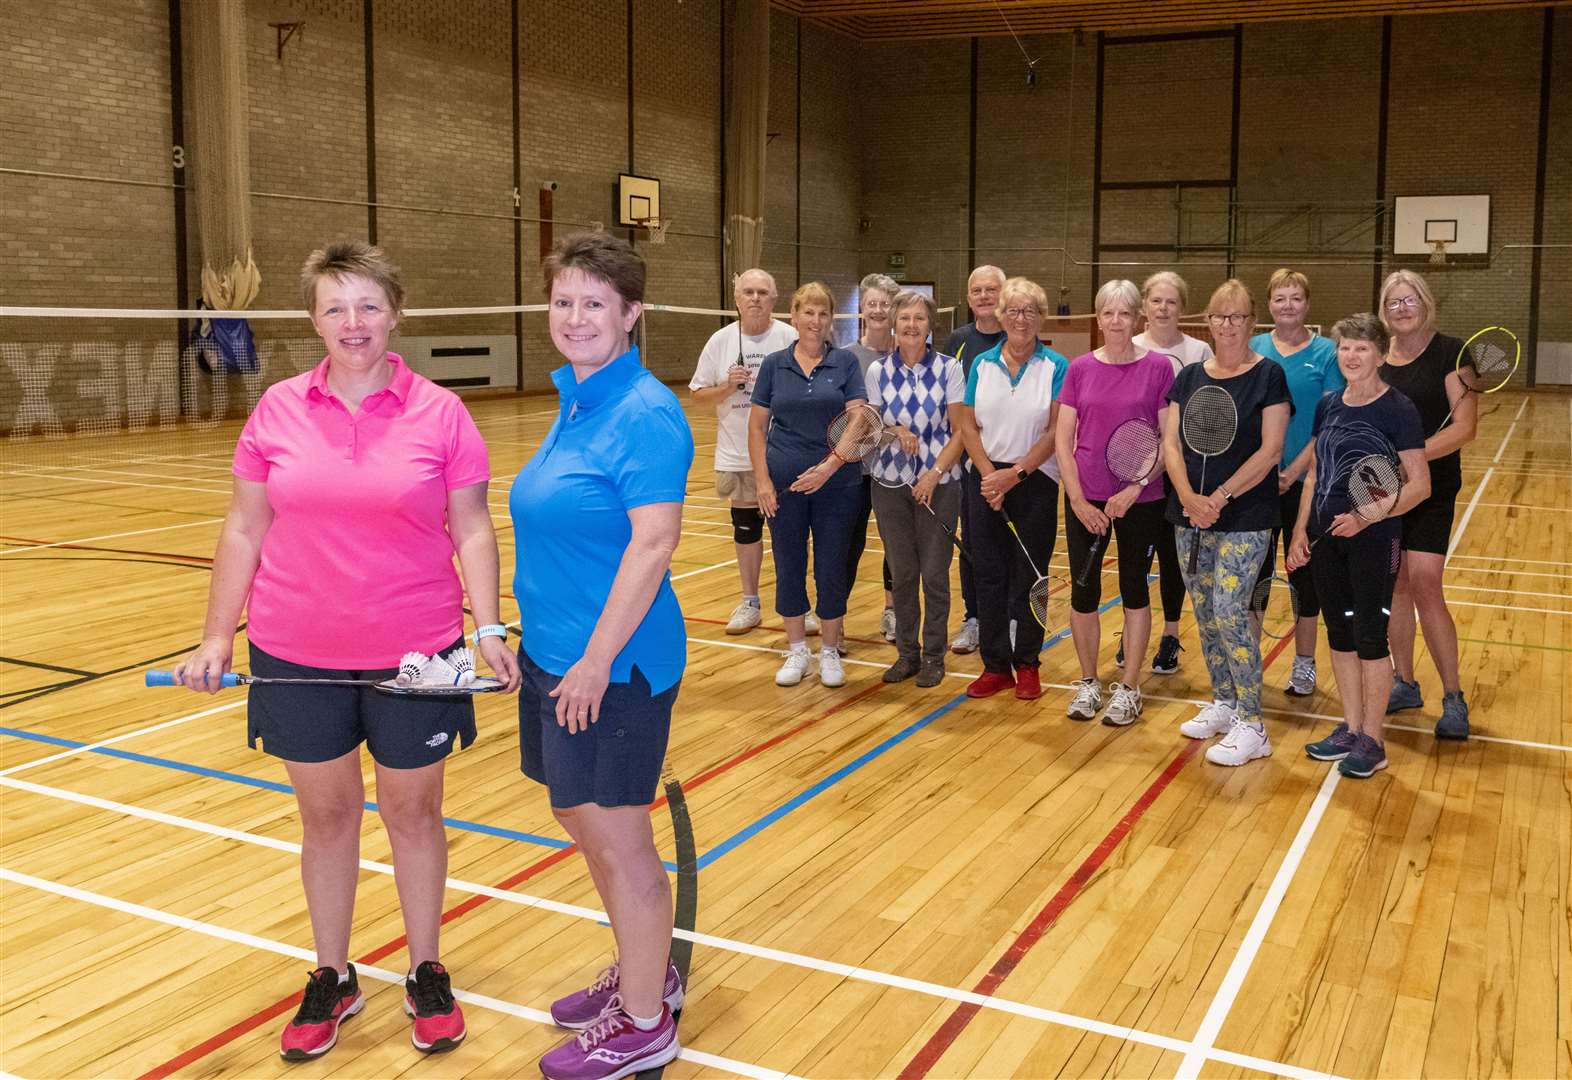 Badminton coaches, Angela Bell (left) and Caroline Mair (right) are starting a new over 50s club at Moray Sports Centre in Elgin after the success of an over 60s club at Forres Community Centre...Picture: Beth Taylor